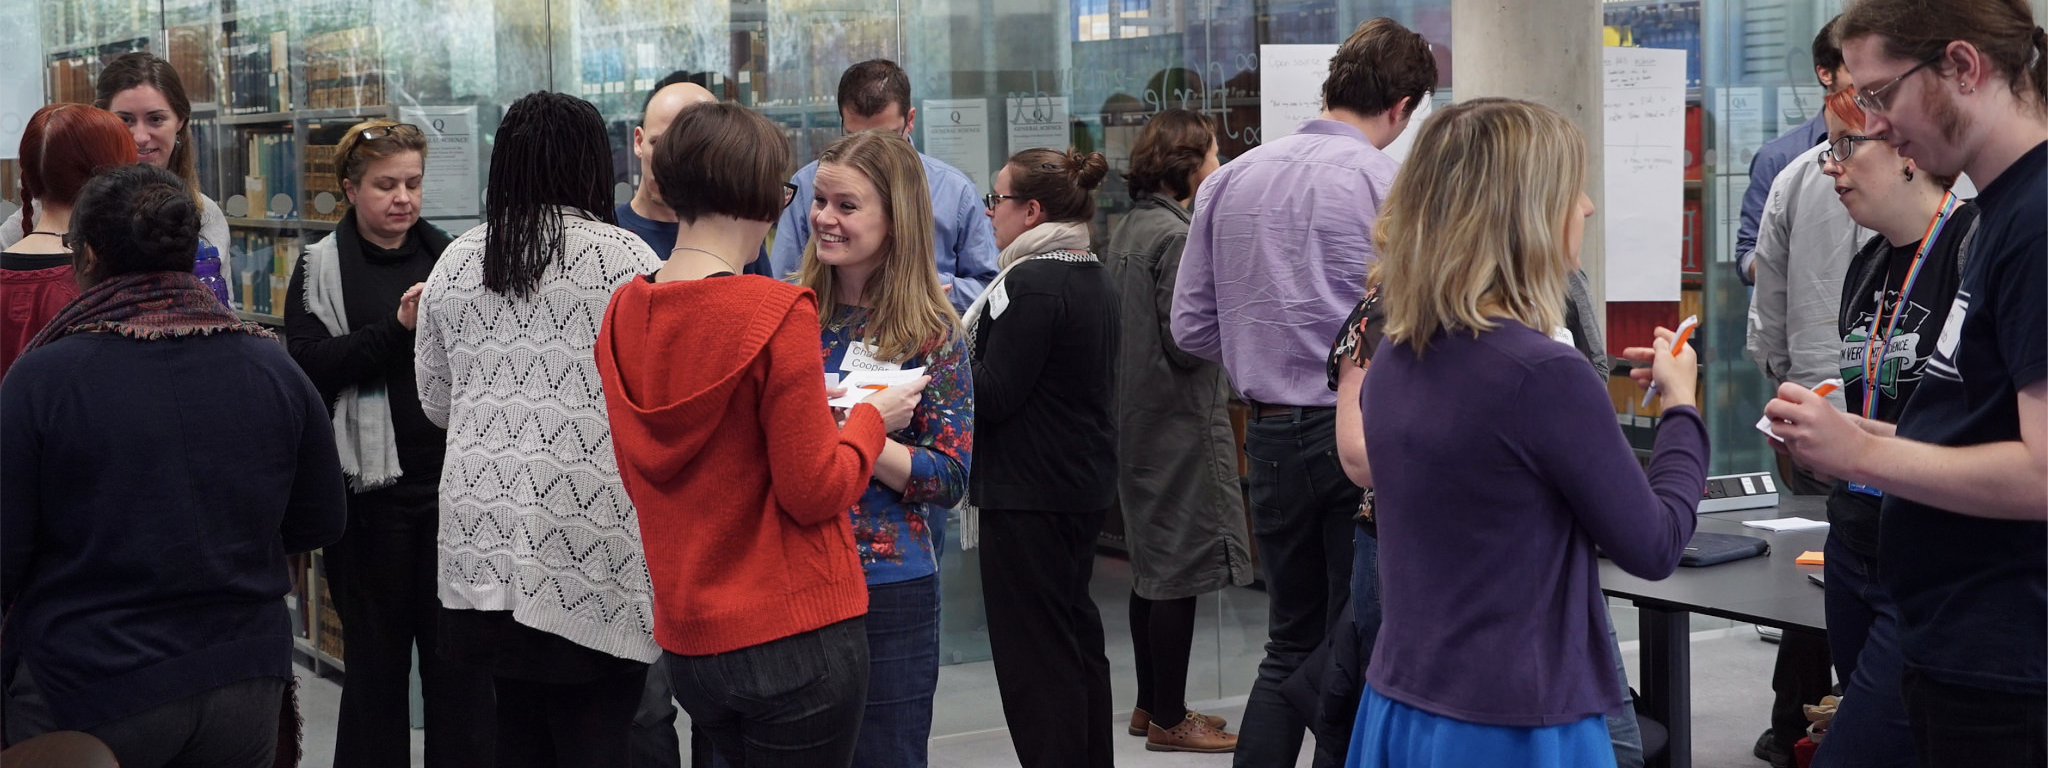 Photo of participants networking at an event